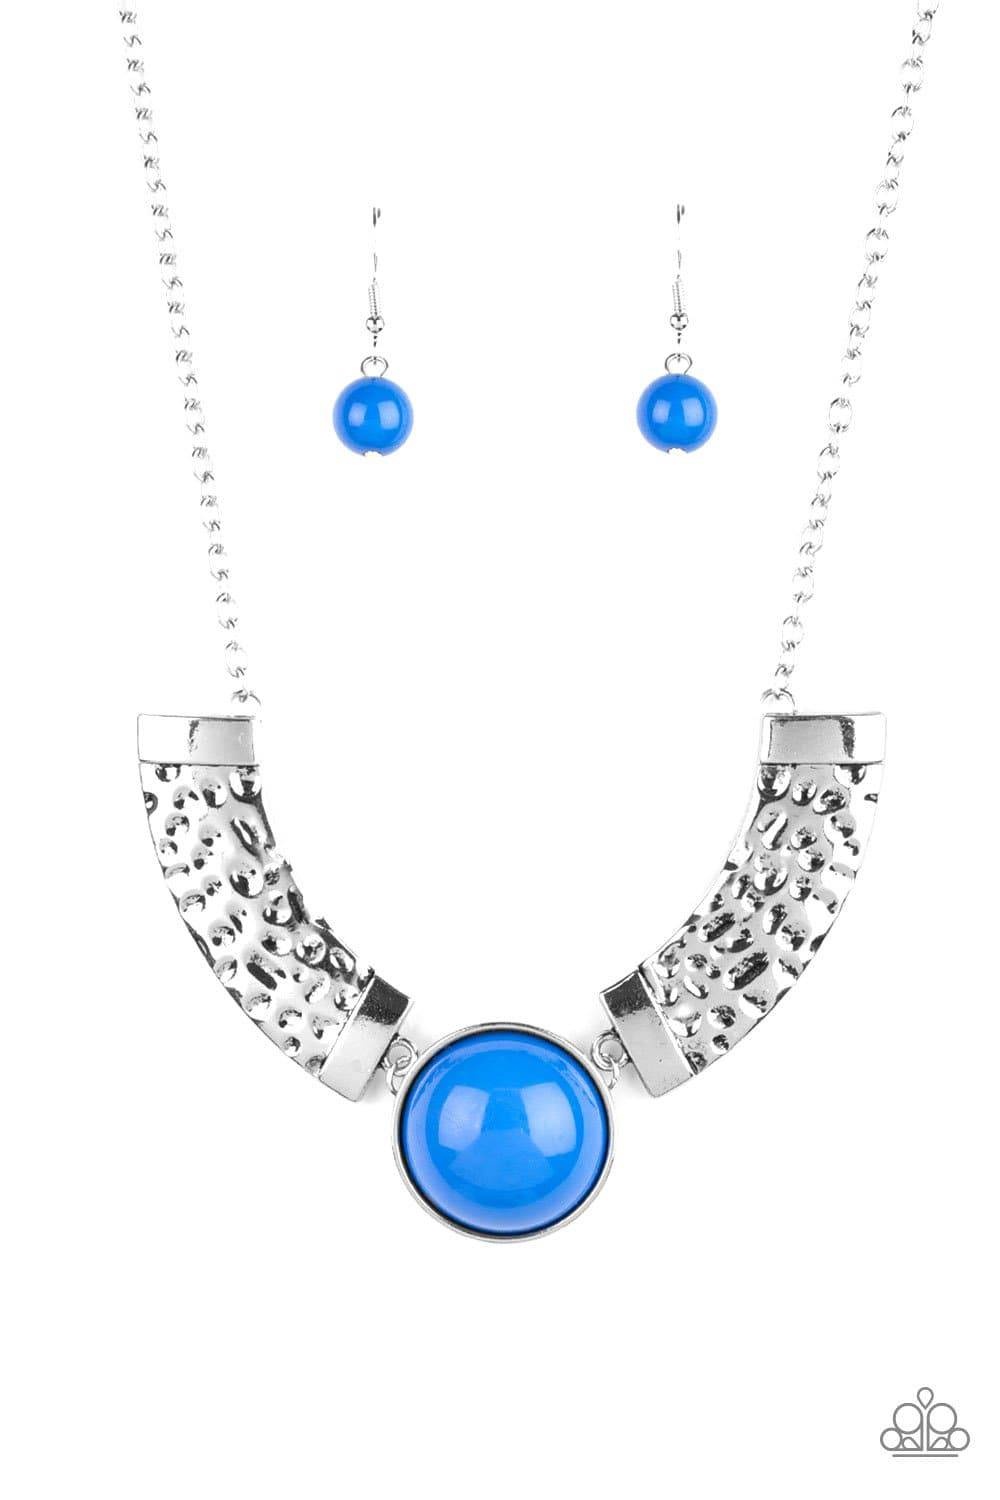 Egyptian Spell -Blue Bead Necklace - Paparazzi Accessories - GlaMarous Titi Jewels